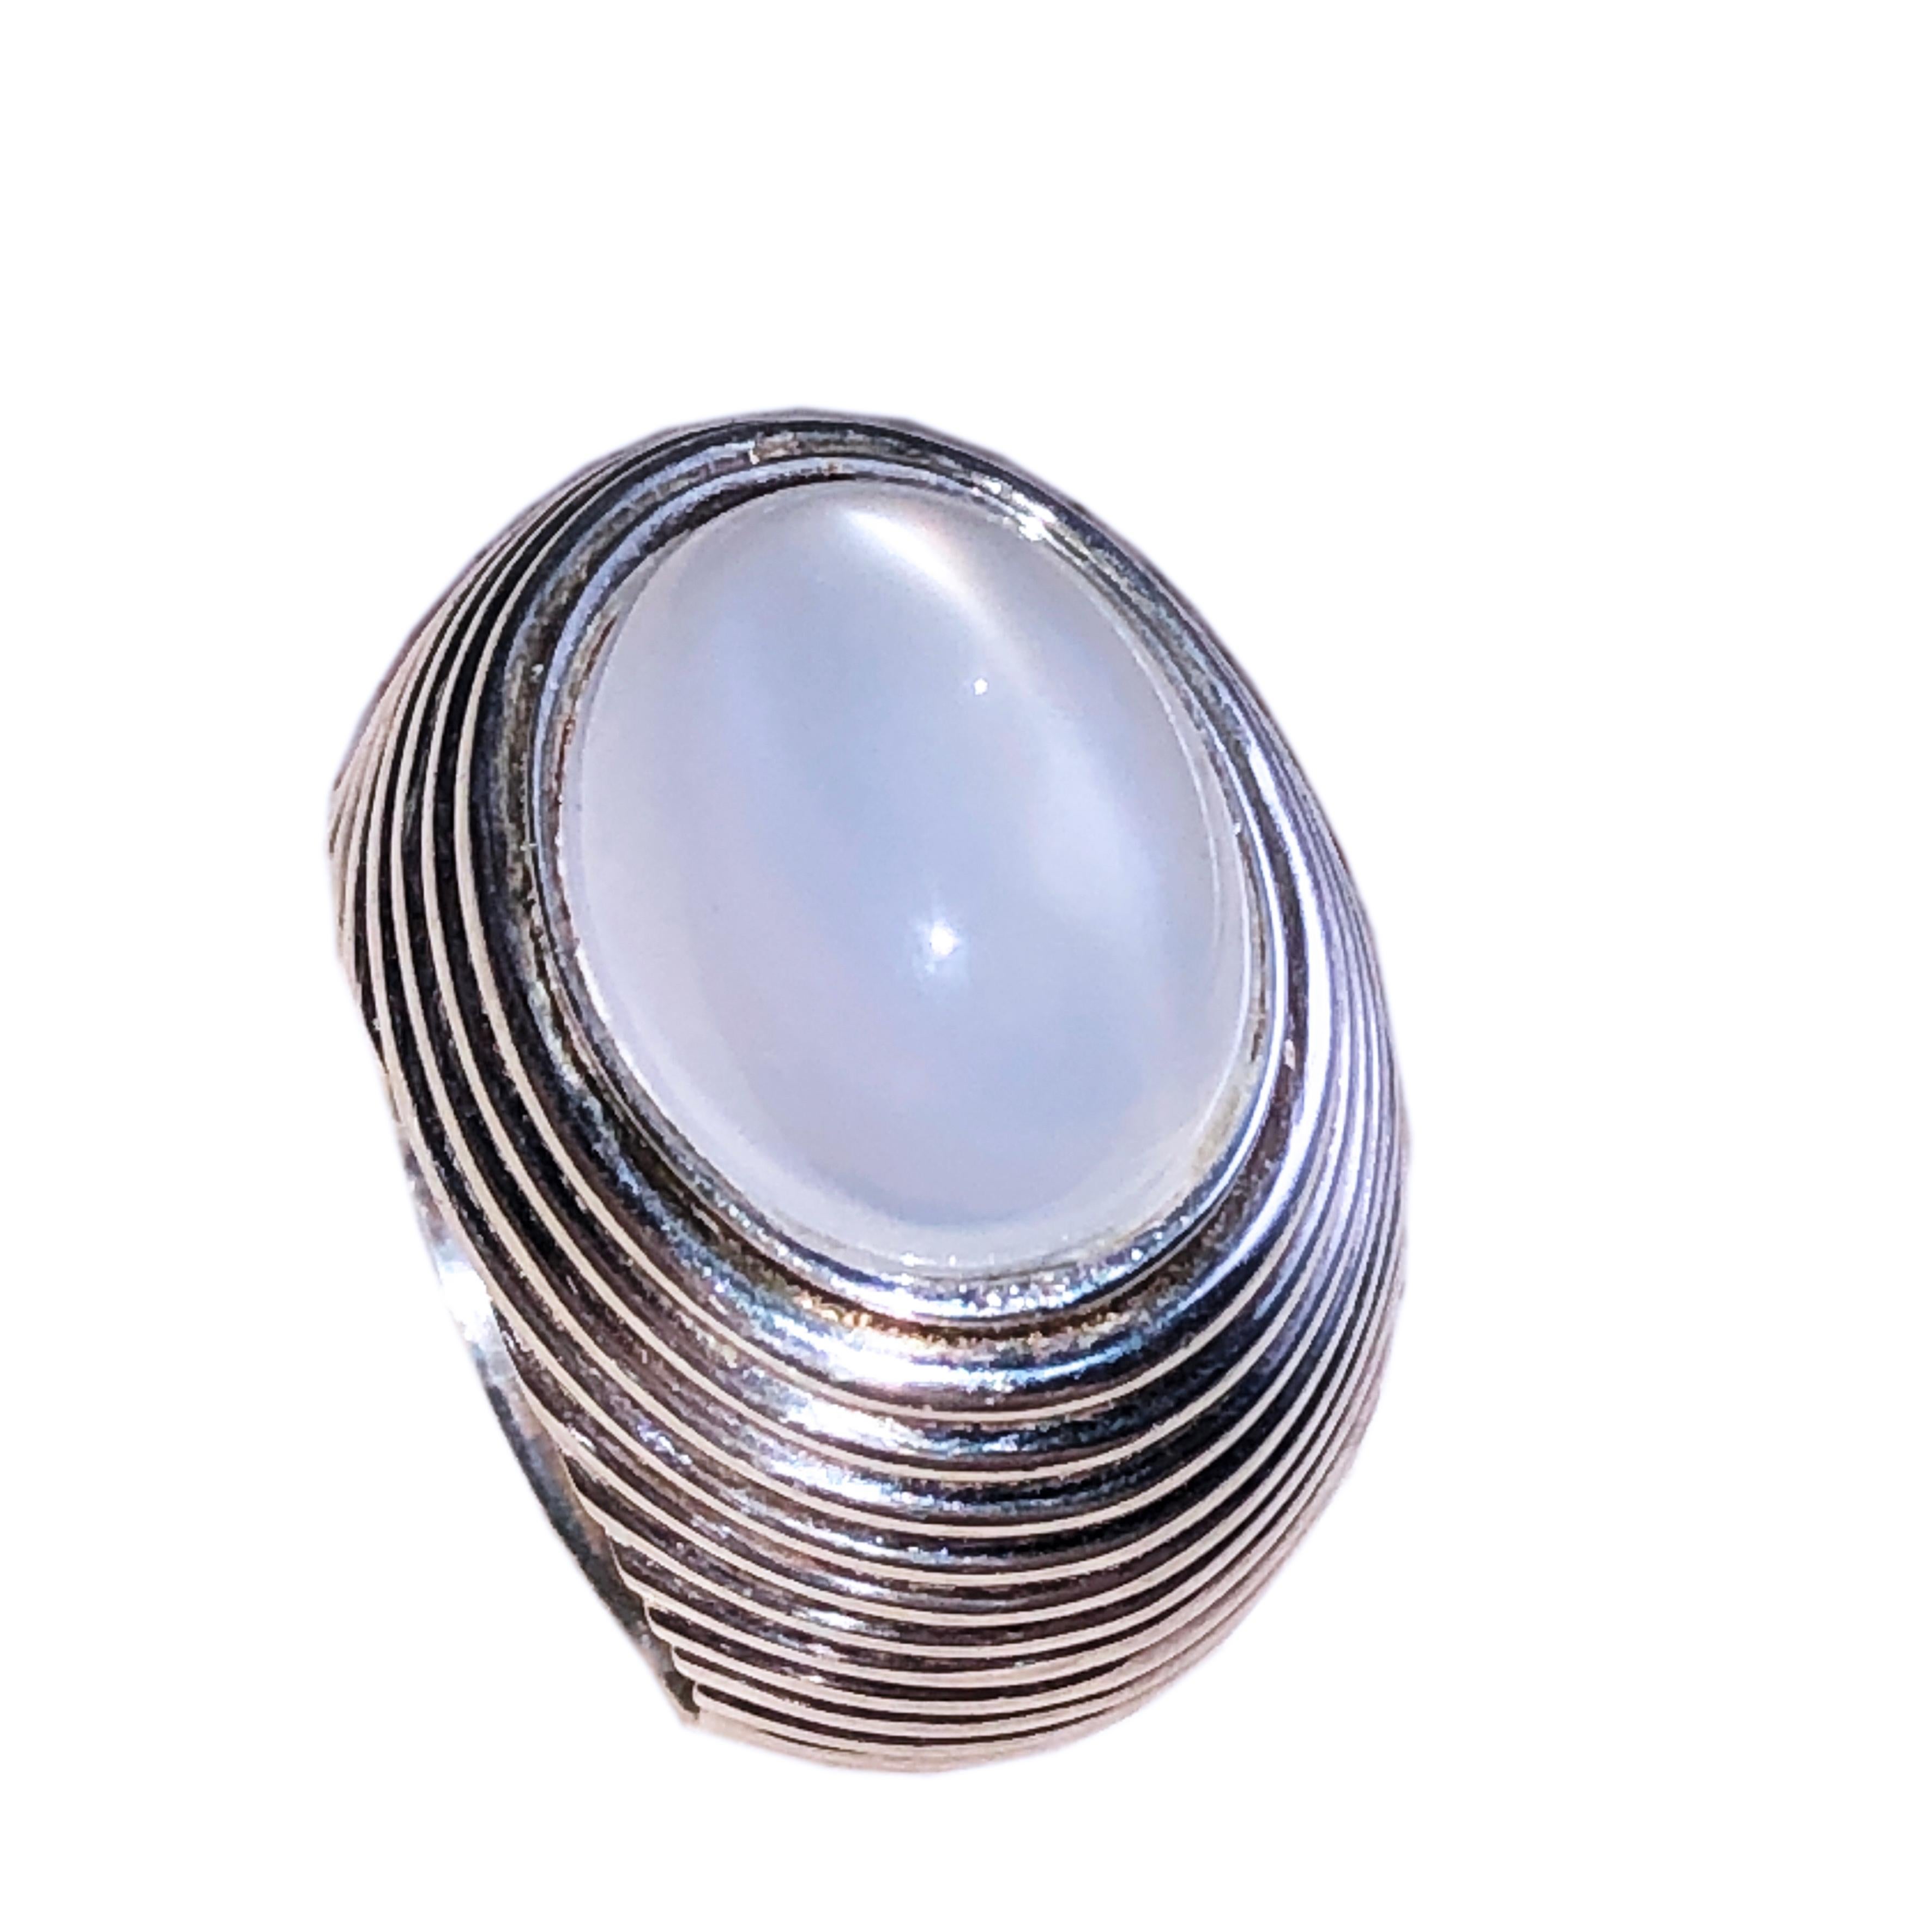 Berca One-of-a-Kind 12 Carat Natural Moonstone Cabochon Sterling Silver Ring 5